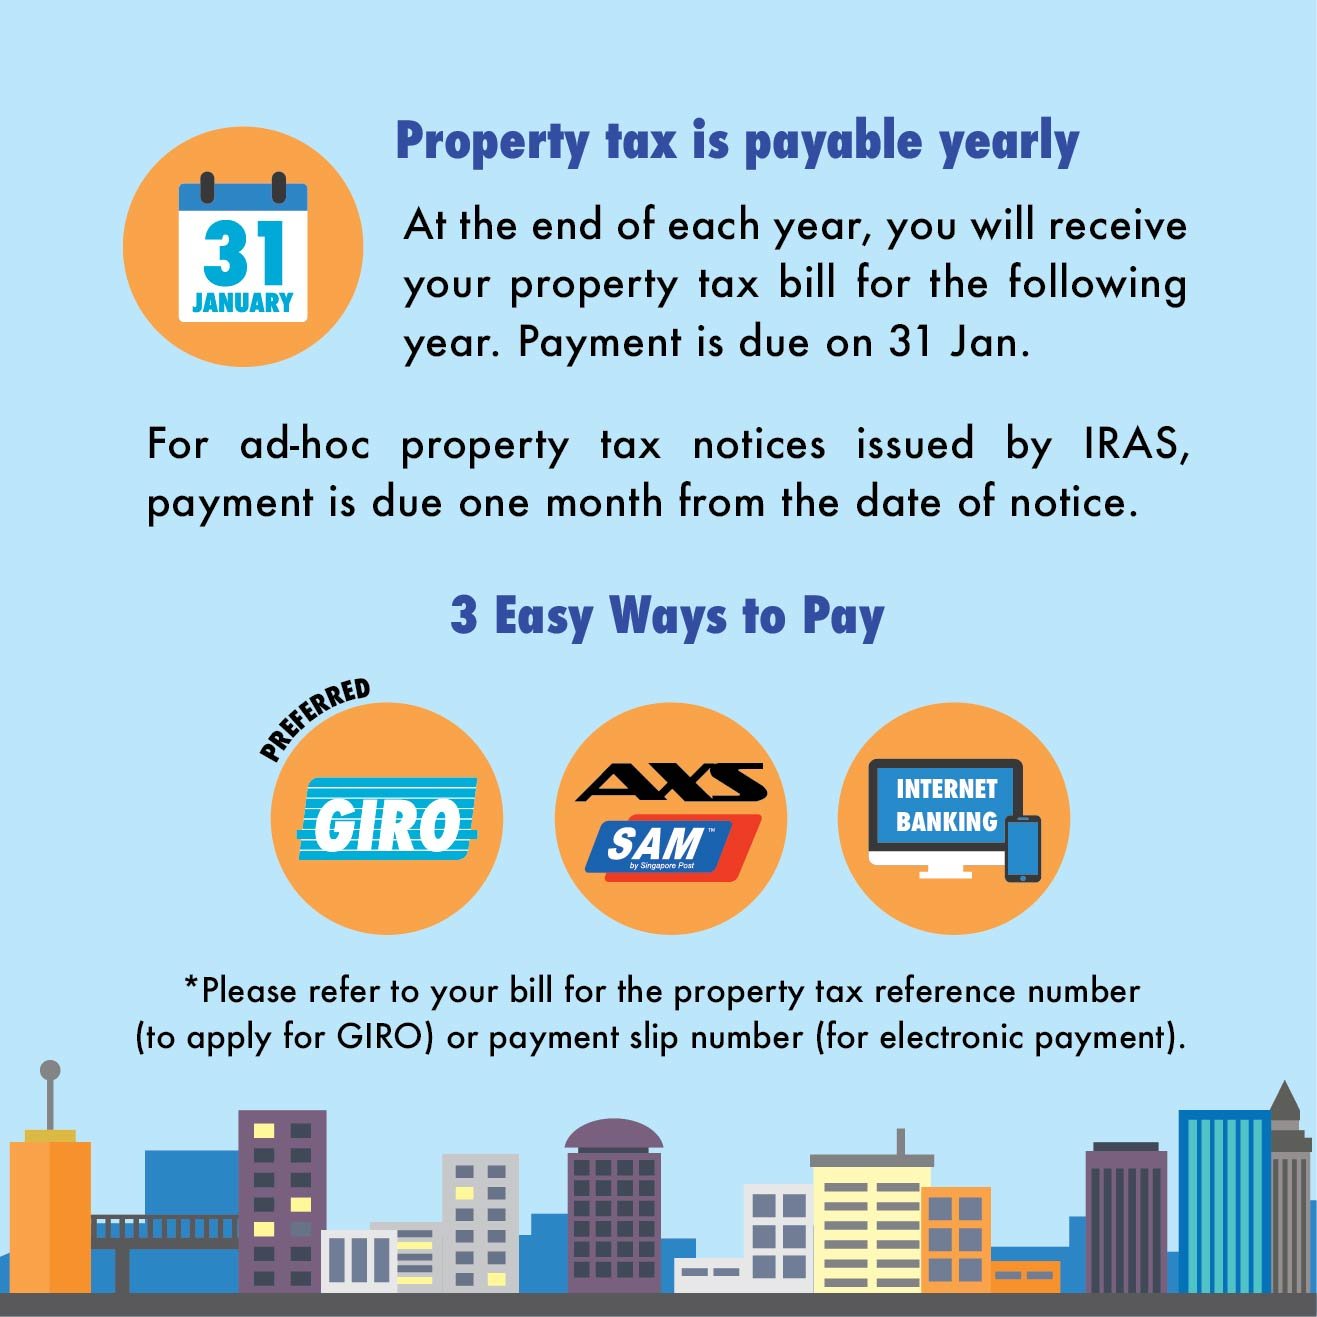 Property tax is payable yearly by 31 Jan. For ad-hoc property tax notices, payment is due one month from the date of notice. You can pay your taxes via GIRO, AXS/SAM or Internet Banking.